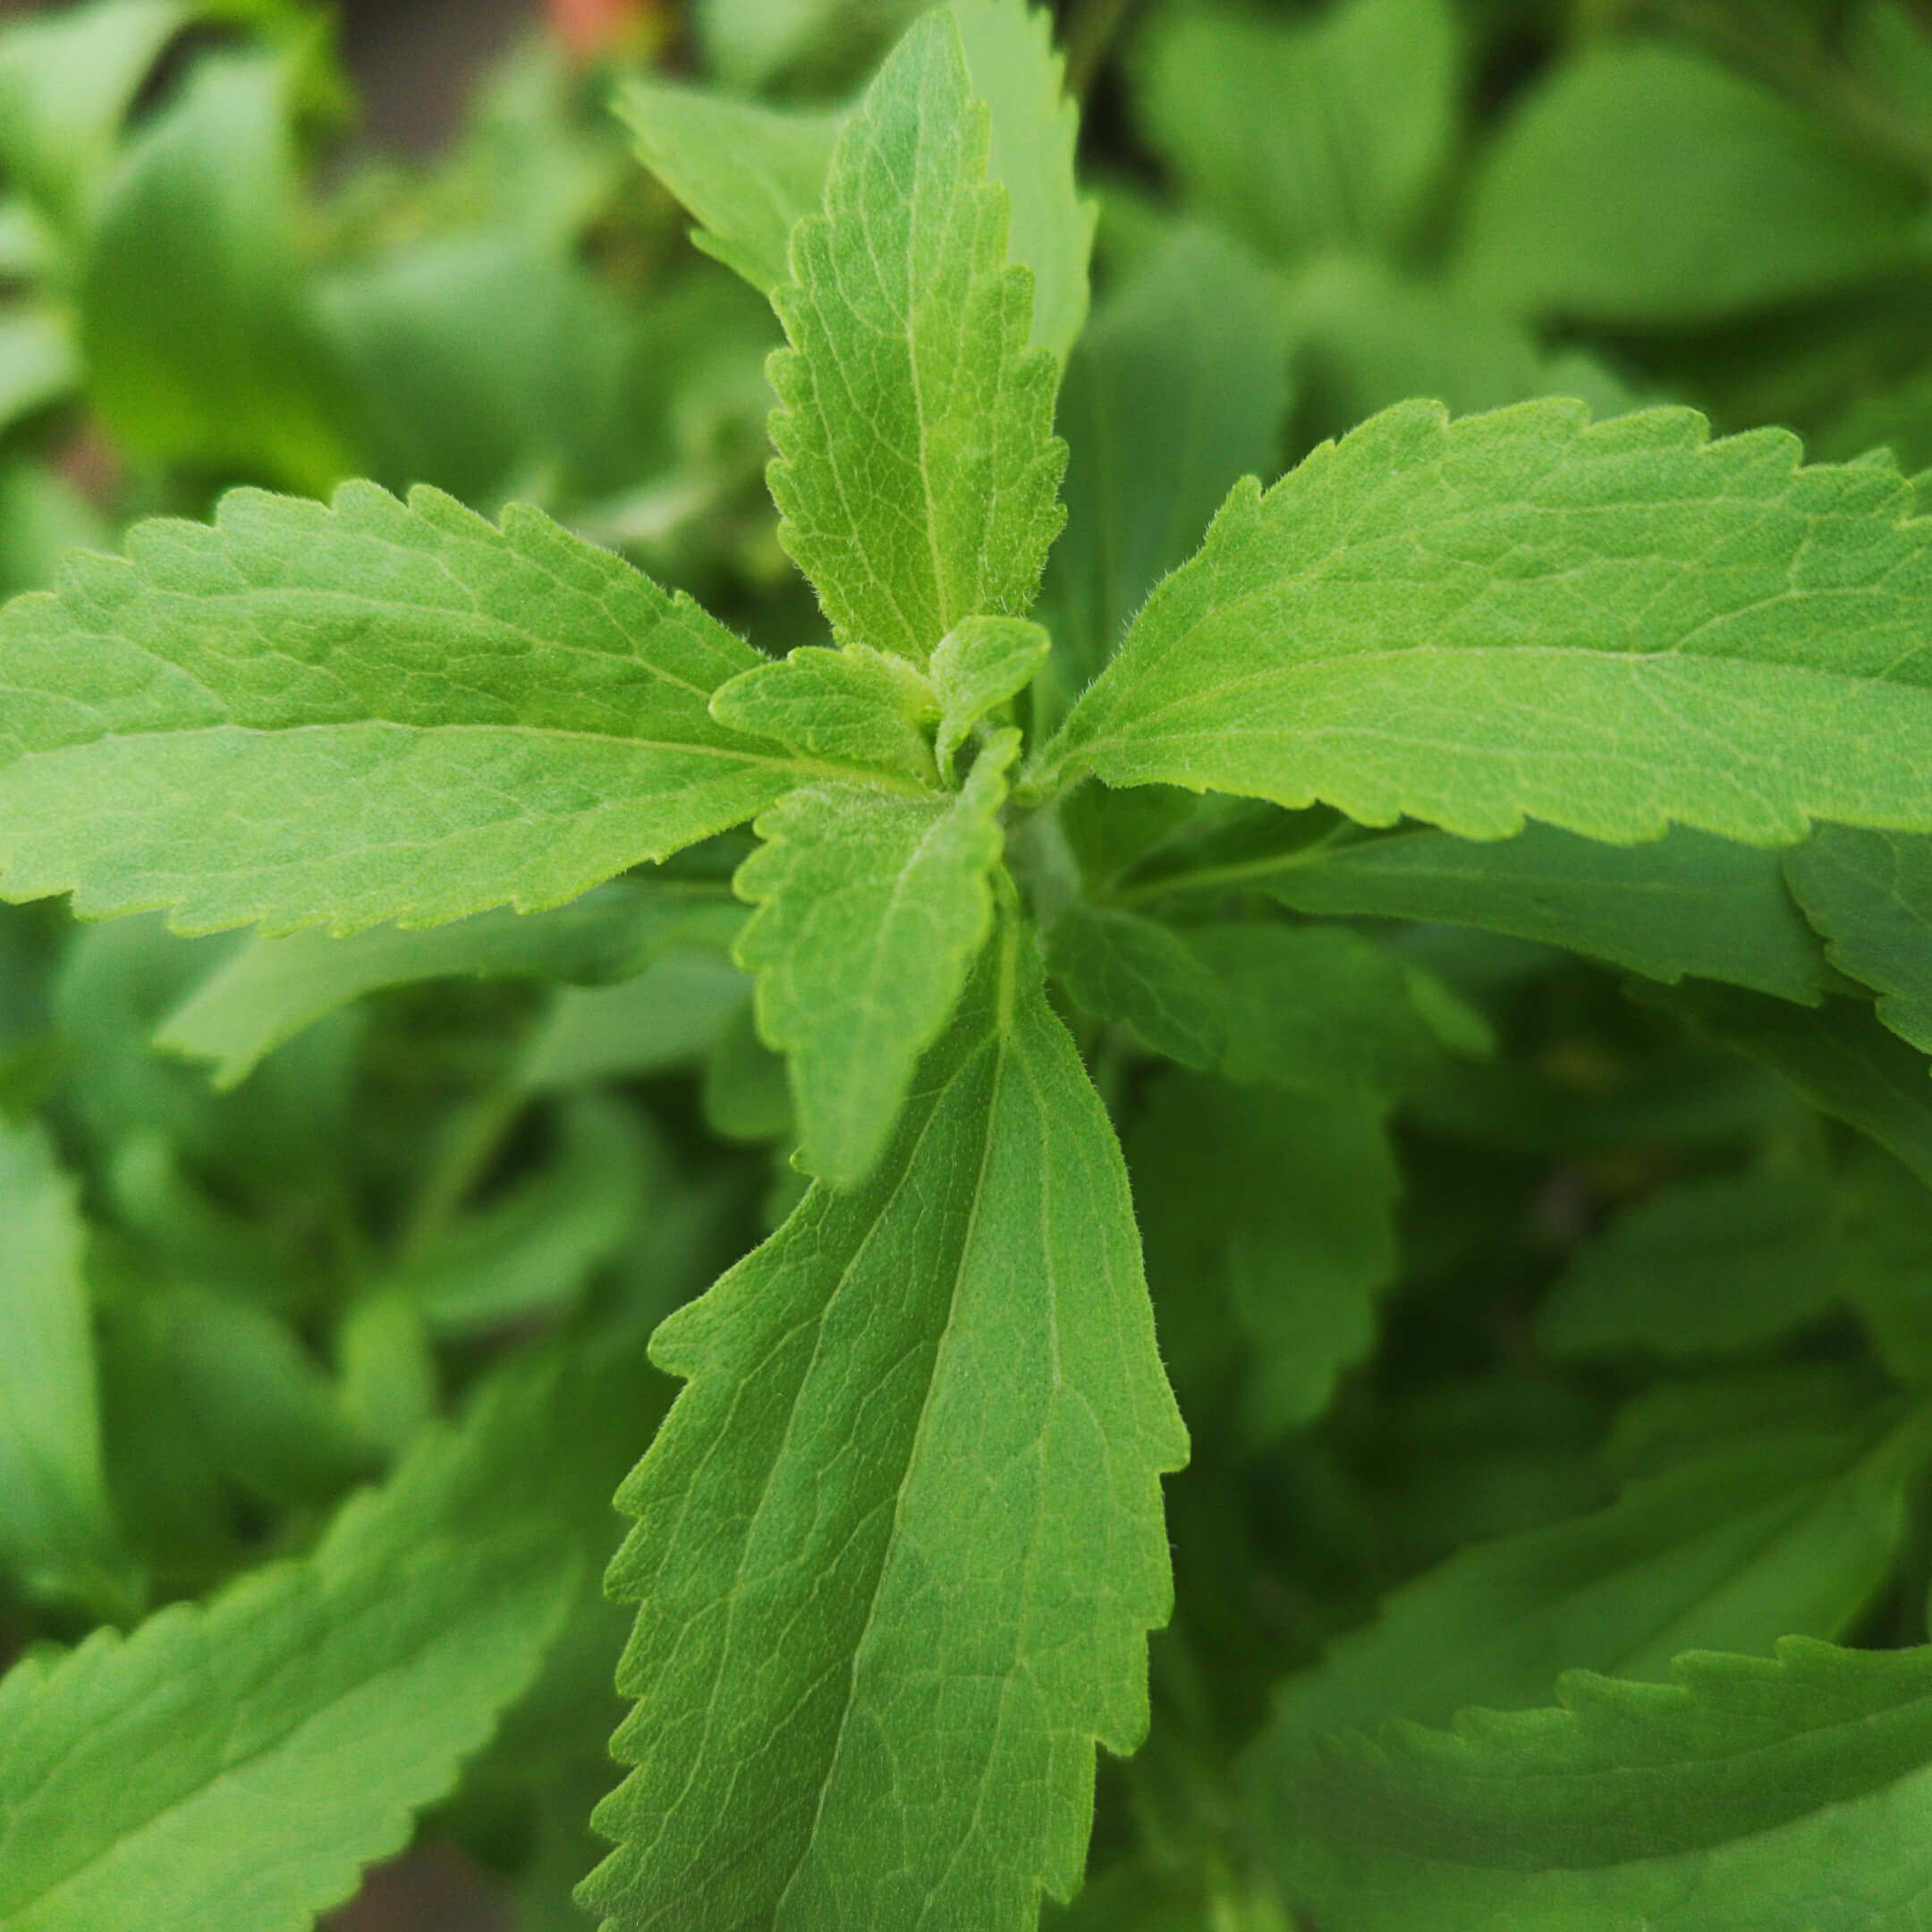 The Stevia sweetener from the Stevia plant